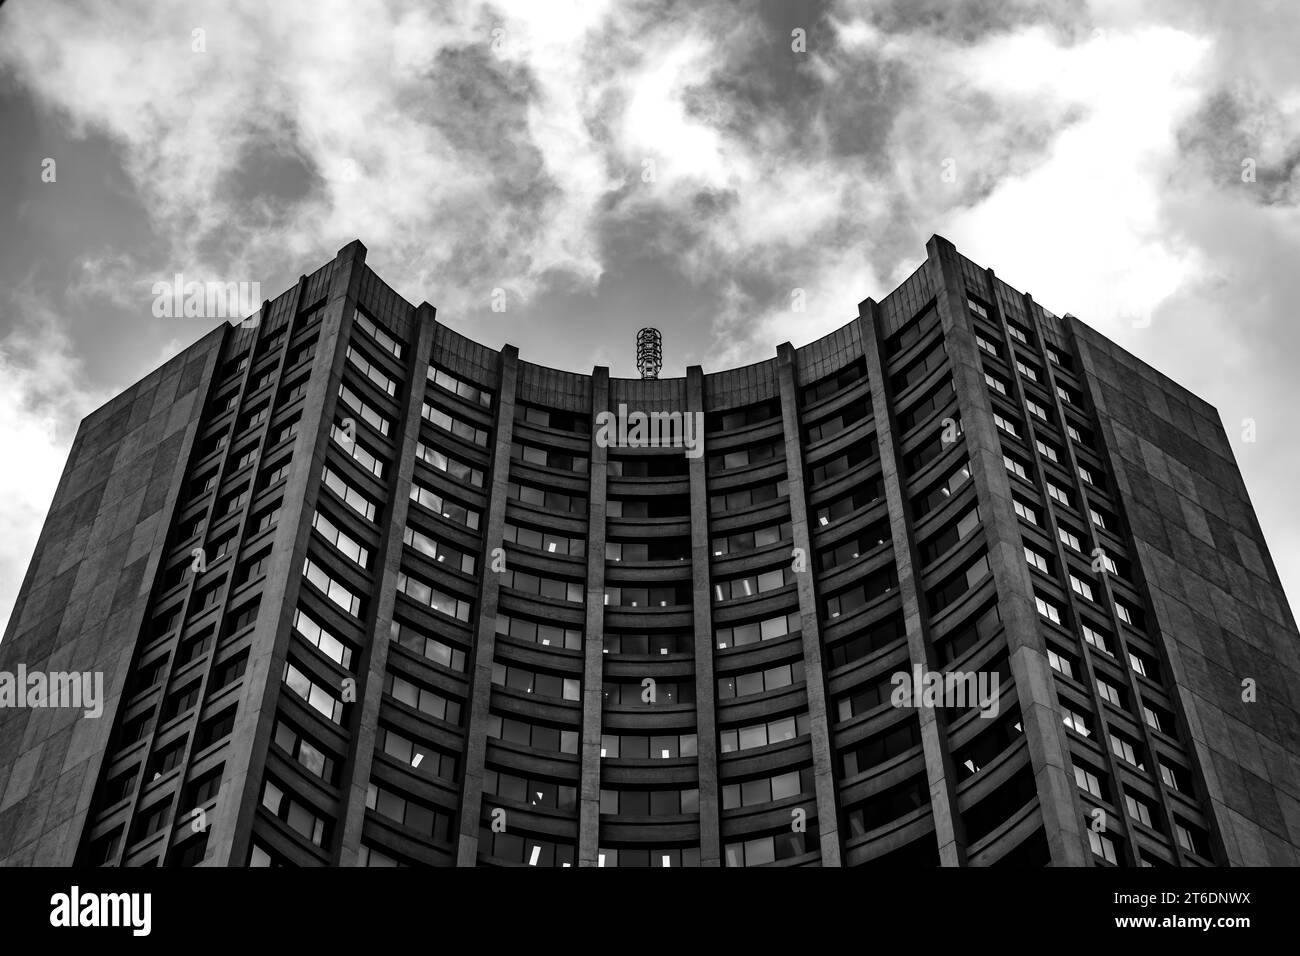 Bottom-up view of a tall curved symmetrical building in Black and White, Melbourne, Australia Stock Photo